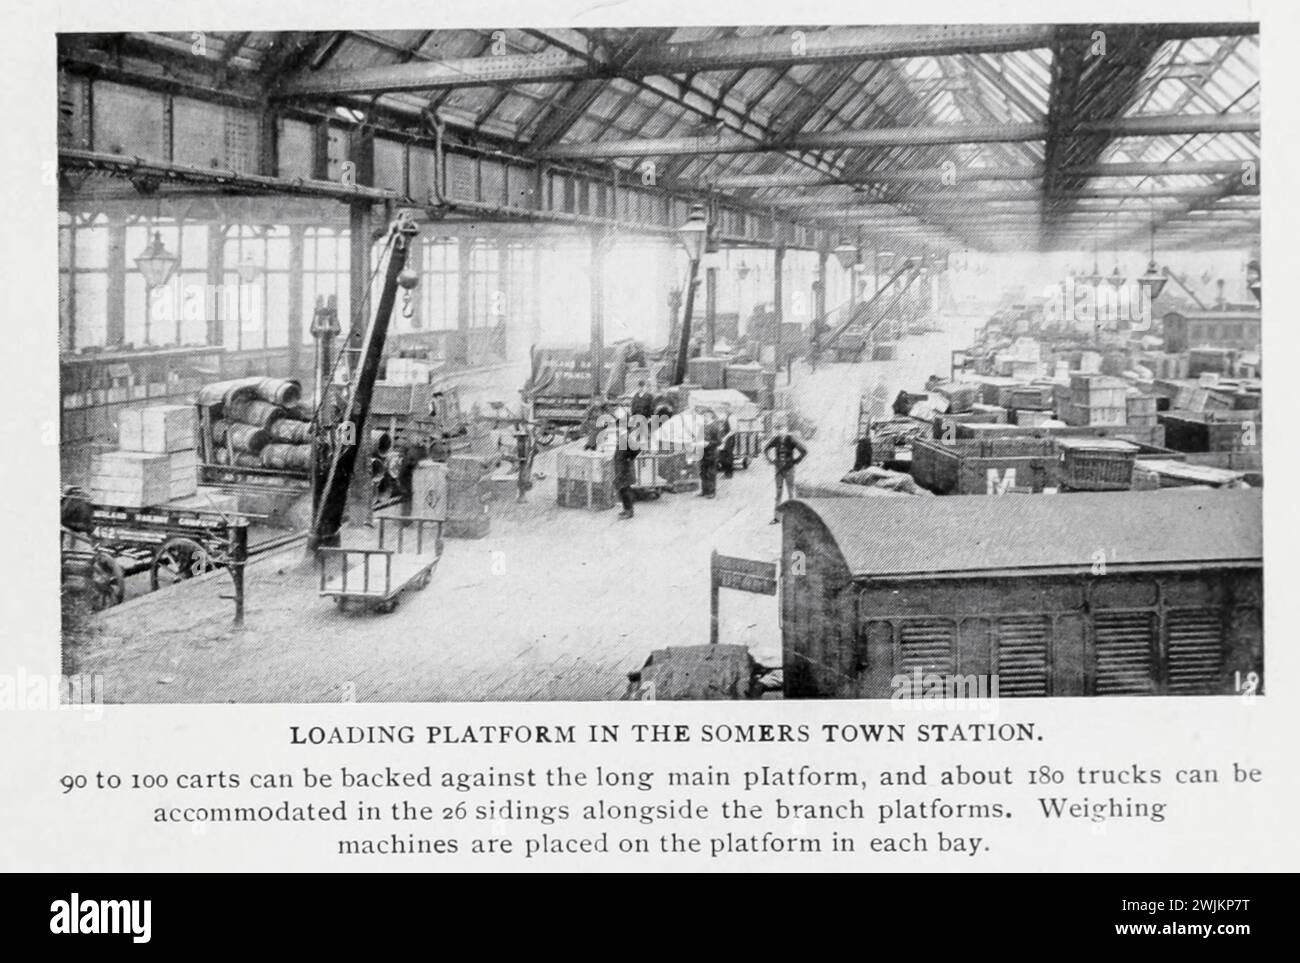 LOADING PLATFORM IN THE SOMERS TOWN STATION. from the Article ENGLISH GOODS STATIONS AND RAILWAY YARDS. By Arch. R. Whitehead. from The Engineering Magazine Devoted to Industrial Progress Volume XIV October 1897 - March 1898 The Engineering Magazine Co Stock Photo